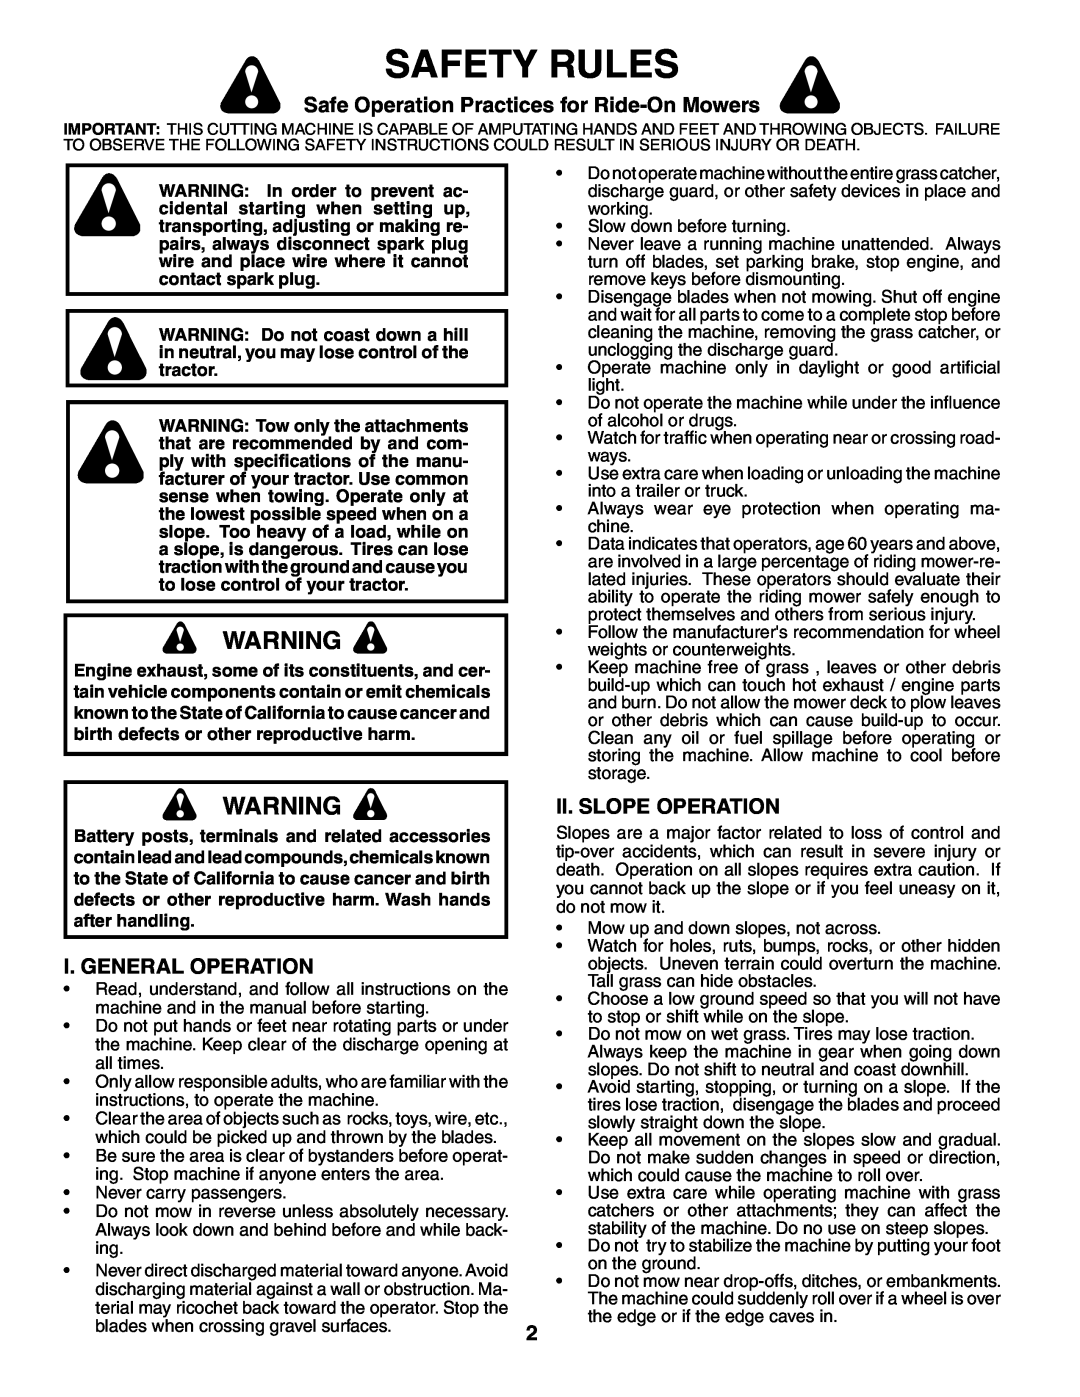 Poulan DB27H48YT manual Safety Rules, Safe Operation Practices for Ride-OnMowers, I. General Operation, Ii. Slope Operation 